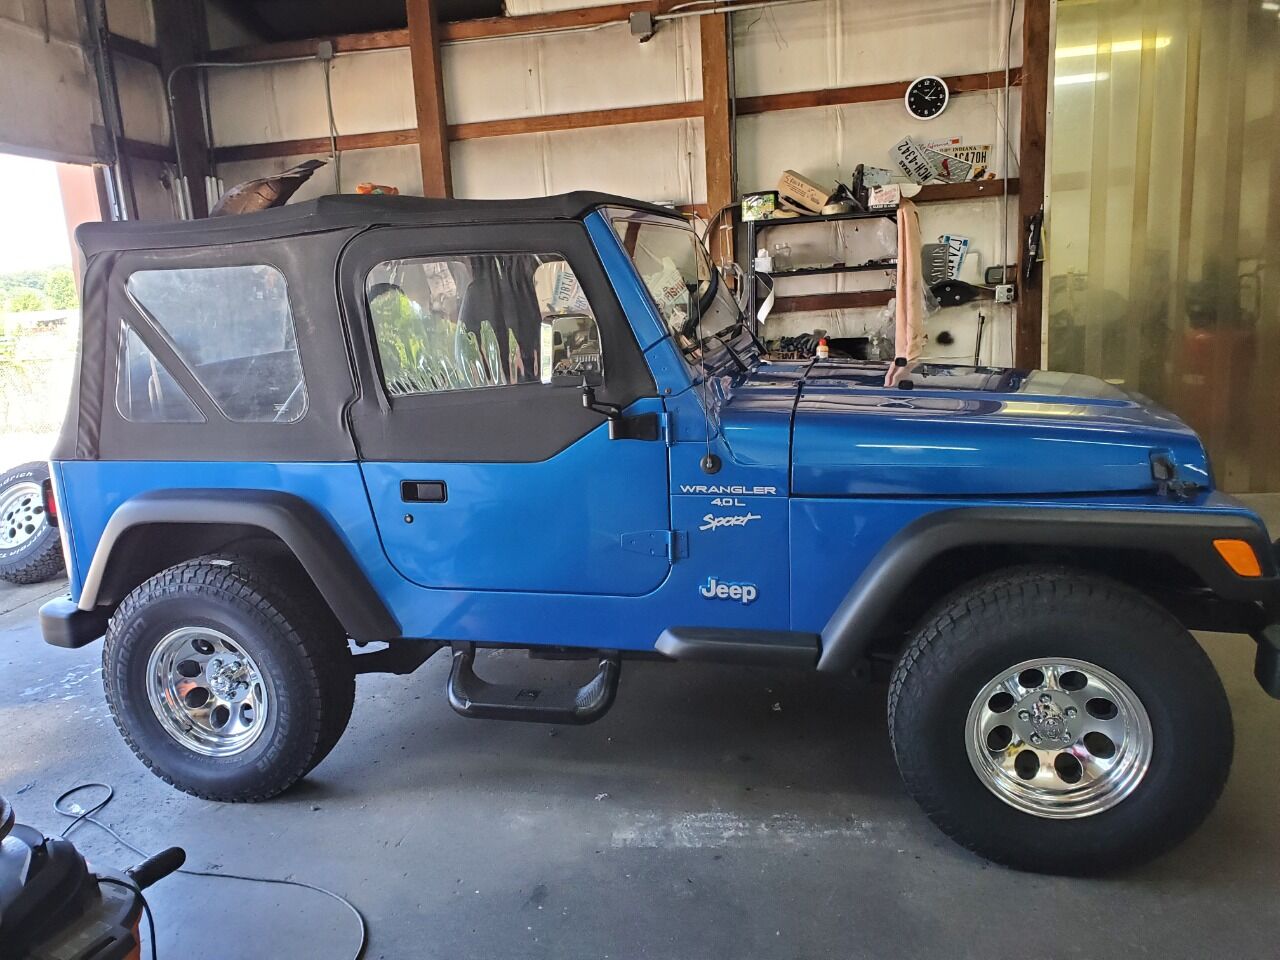 1999 Jeep Wrangler For Sale In Owensboro, KY ®